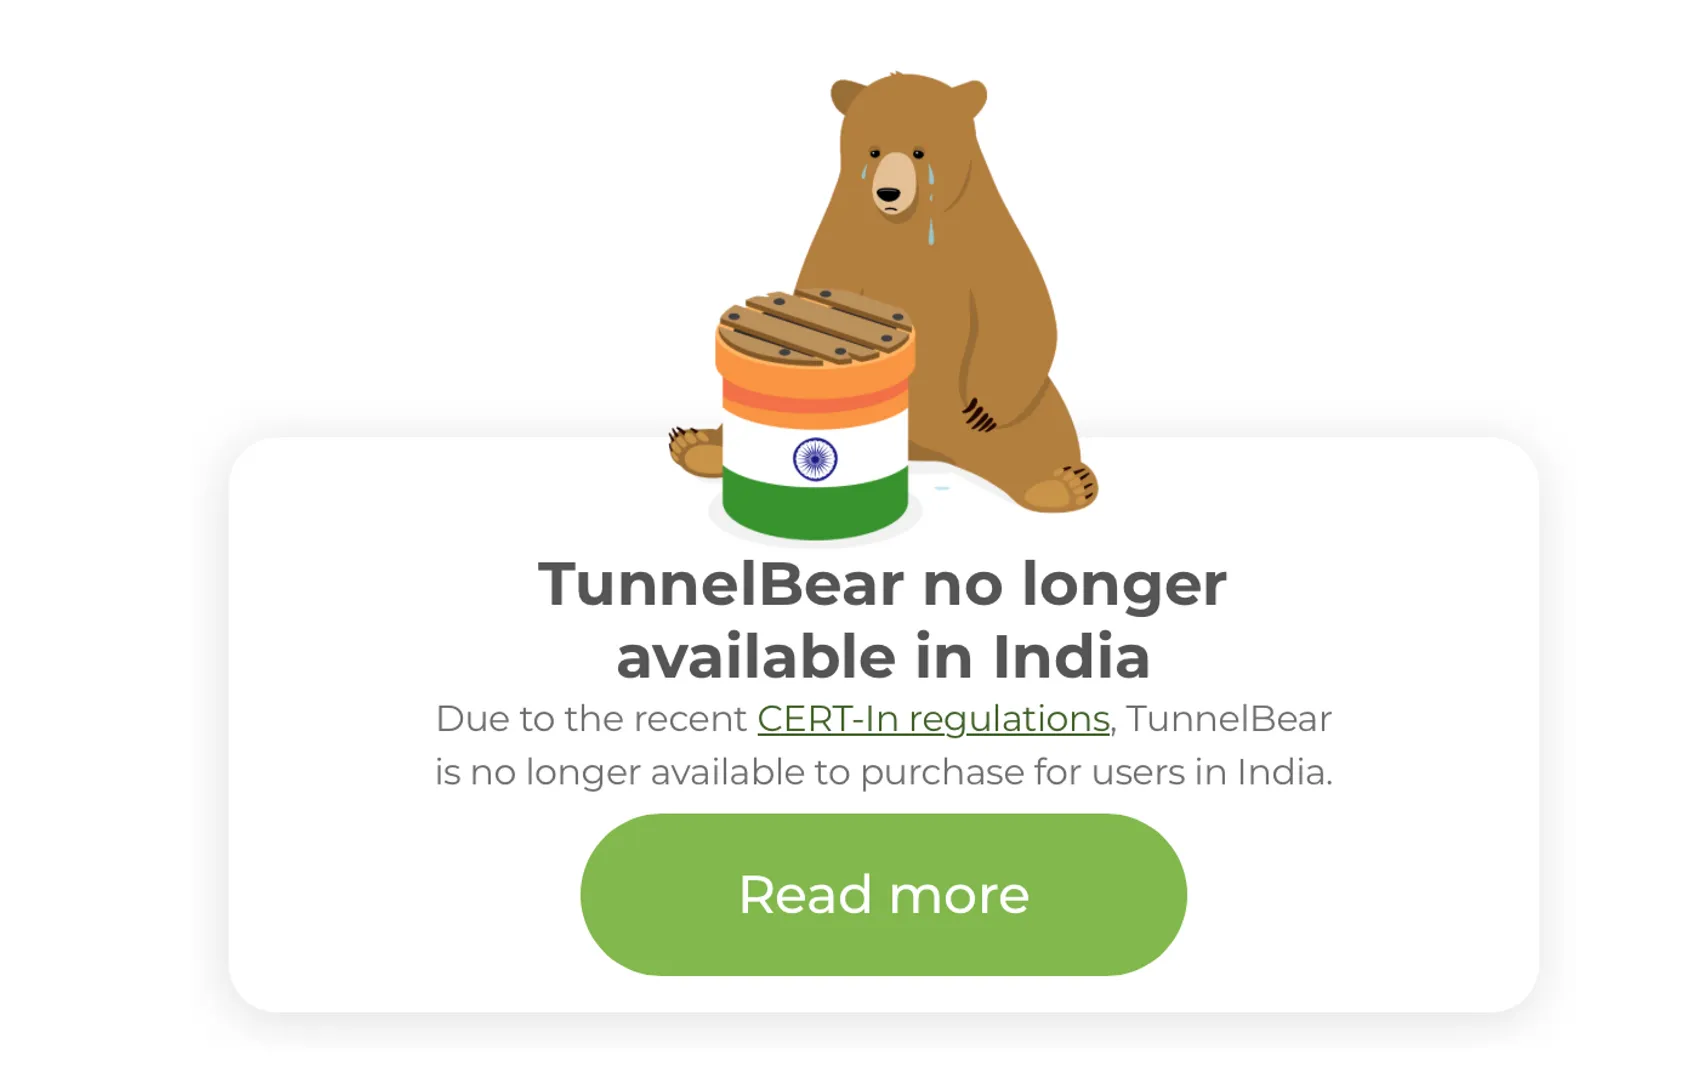 Are you utilising the power of humour in your content?

I have always advocated for adding humour to content and even applications. Our tools are always so serious and professional. 

Why can't we have some fun? 

Today I wanted to download a VPN to check out Claude.ai (which has yet to be available in India) and was made aware by TunnelBear that VPN was no longer allowed in India. 

The best part was the funny pop-up that Tunnelbear used to convey this message. It has a crying bear looking at the Tunnel, which has been nailed shut. 

Even if I cannot use the tool, I will remember it for its humour and most likely look at using it in the future when it is available for use.

So find ways to use humour in your tools, websites, apps and content. Make your user's experience a little more fun. 

#humour #fun #morecontentisgood